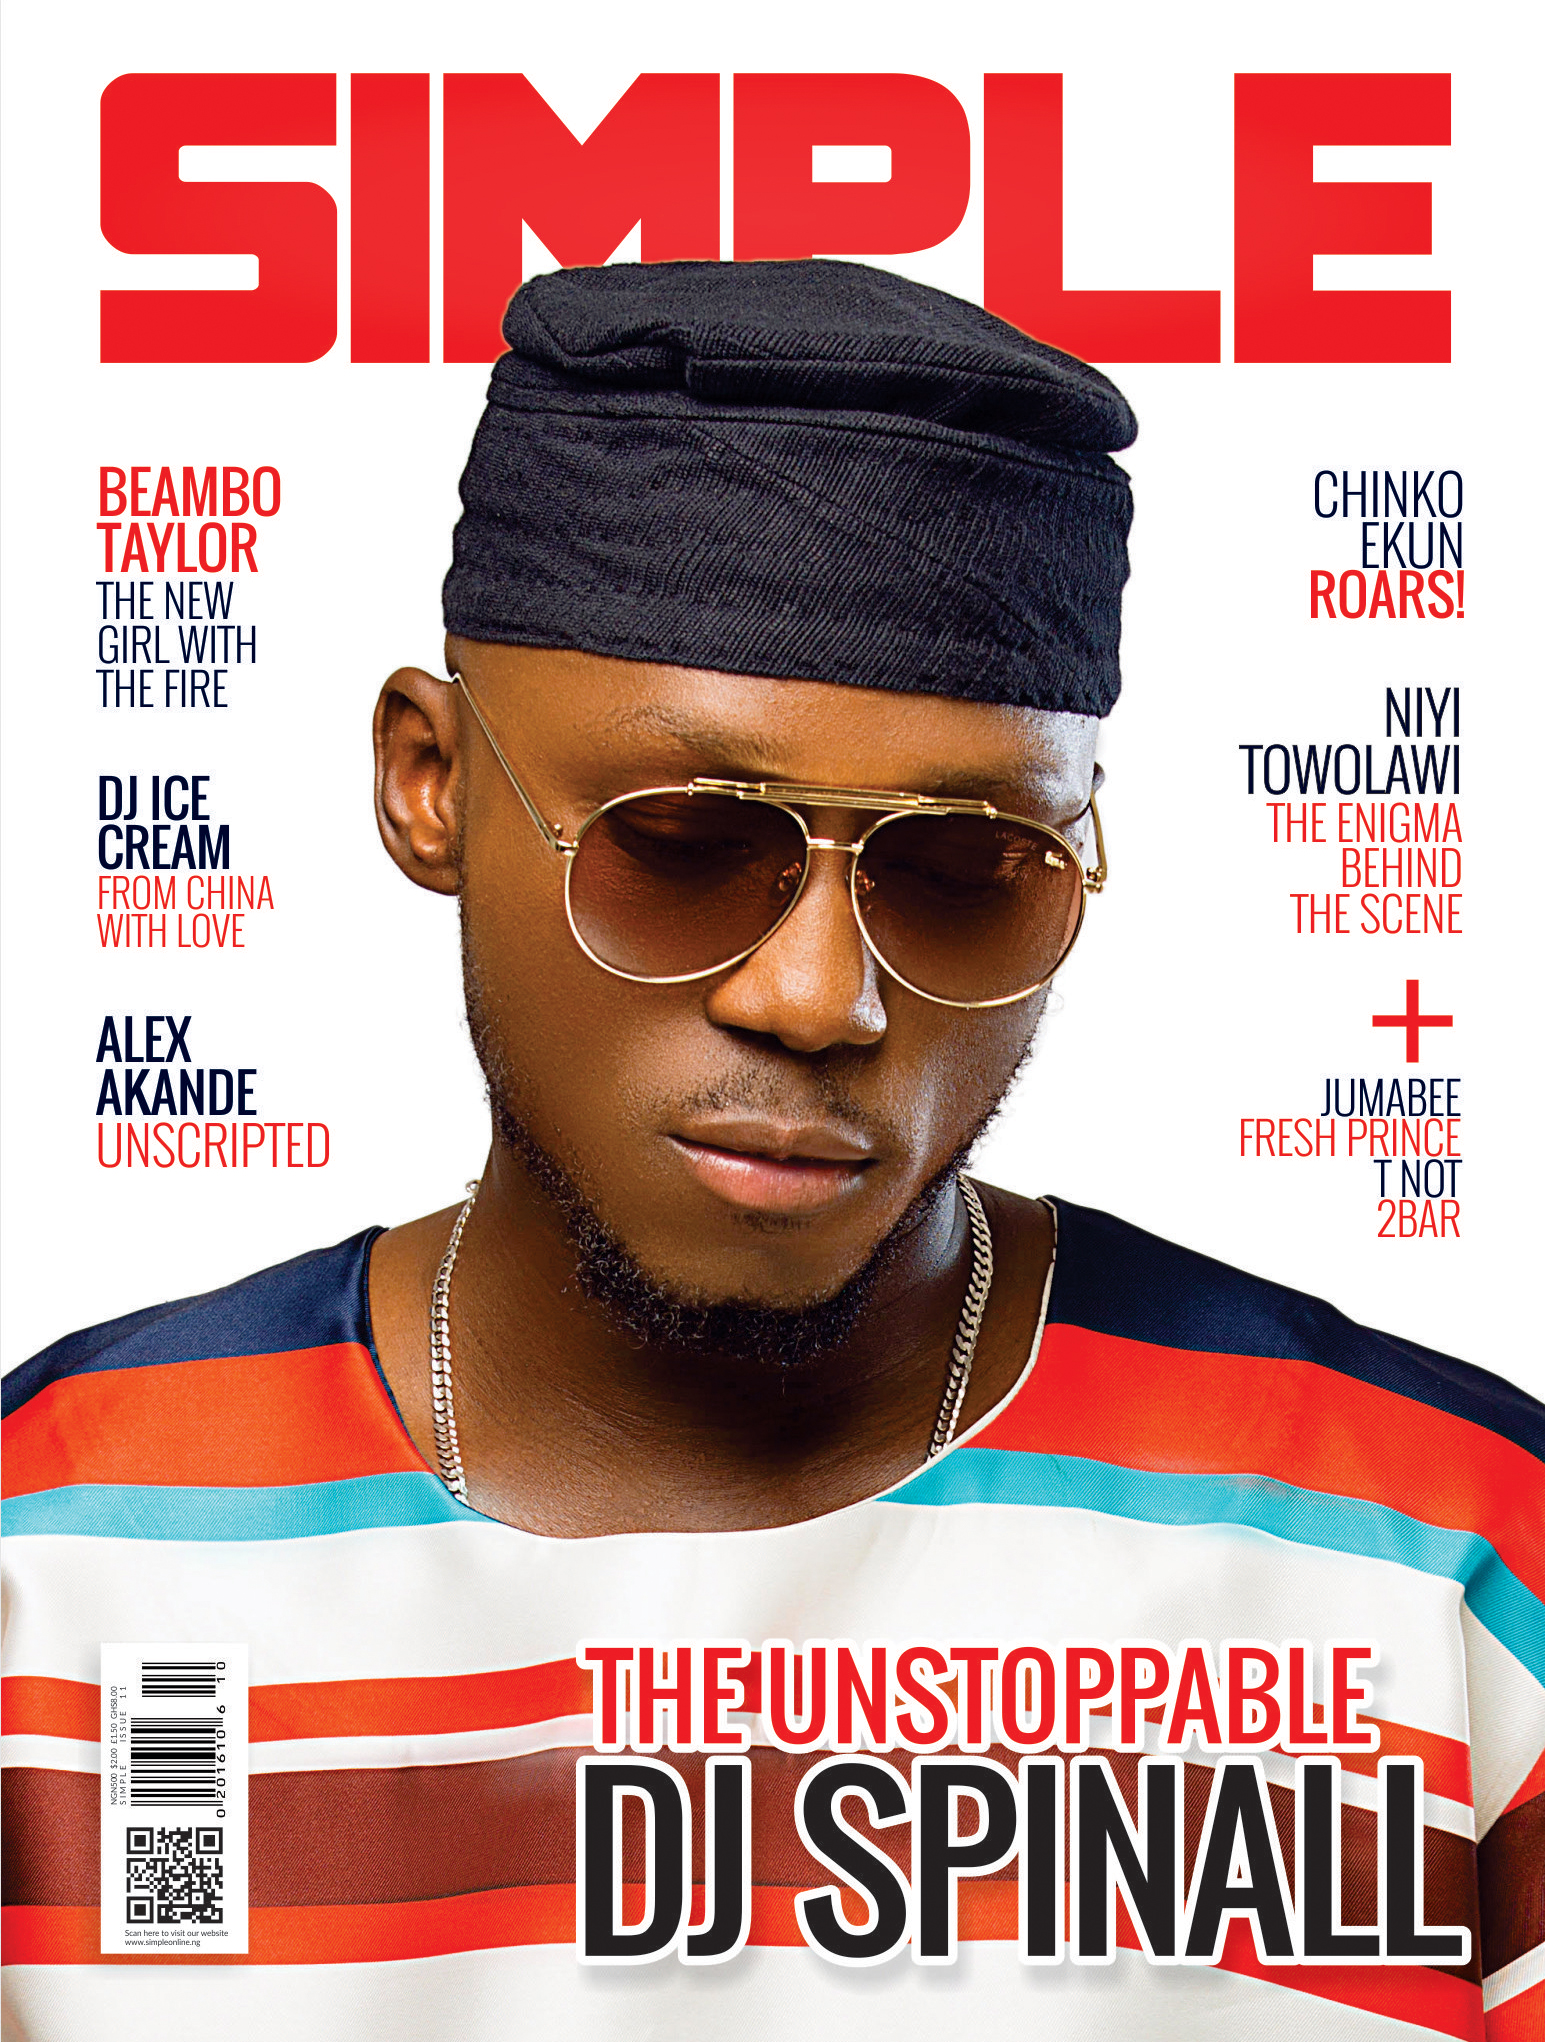 Photo of DJ SPINALL STARTS THE YEAR AS THE COVER STAR OF SIMPLE MAGAZINE